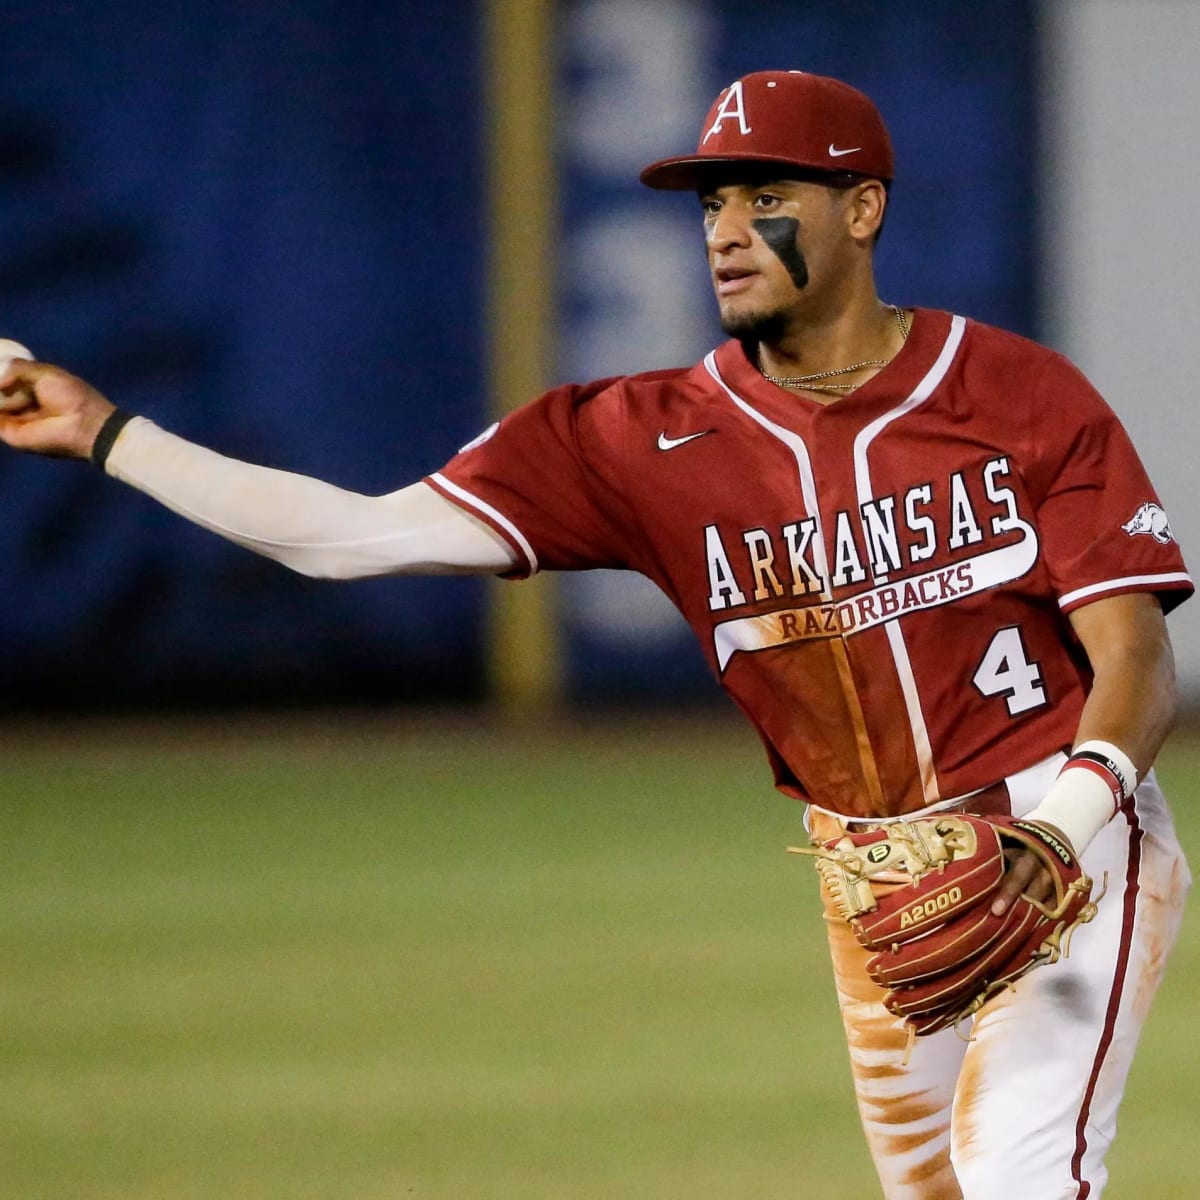 Watch Texas AandM at Arkansas Stream college baseball live, TV channel - How to Watch and Stream Major League and College Sports